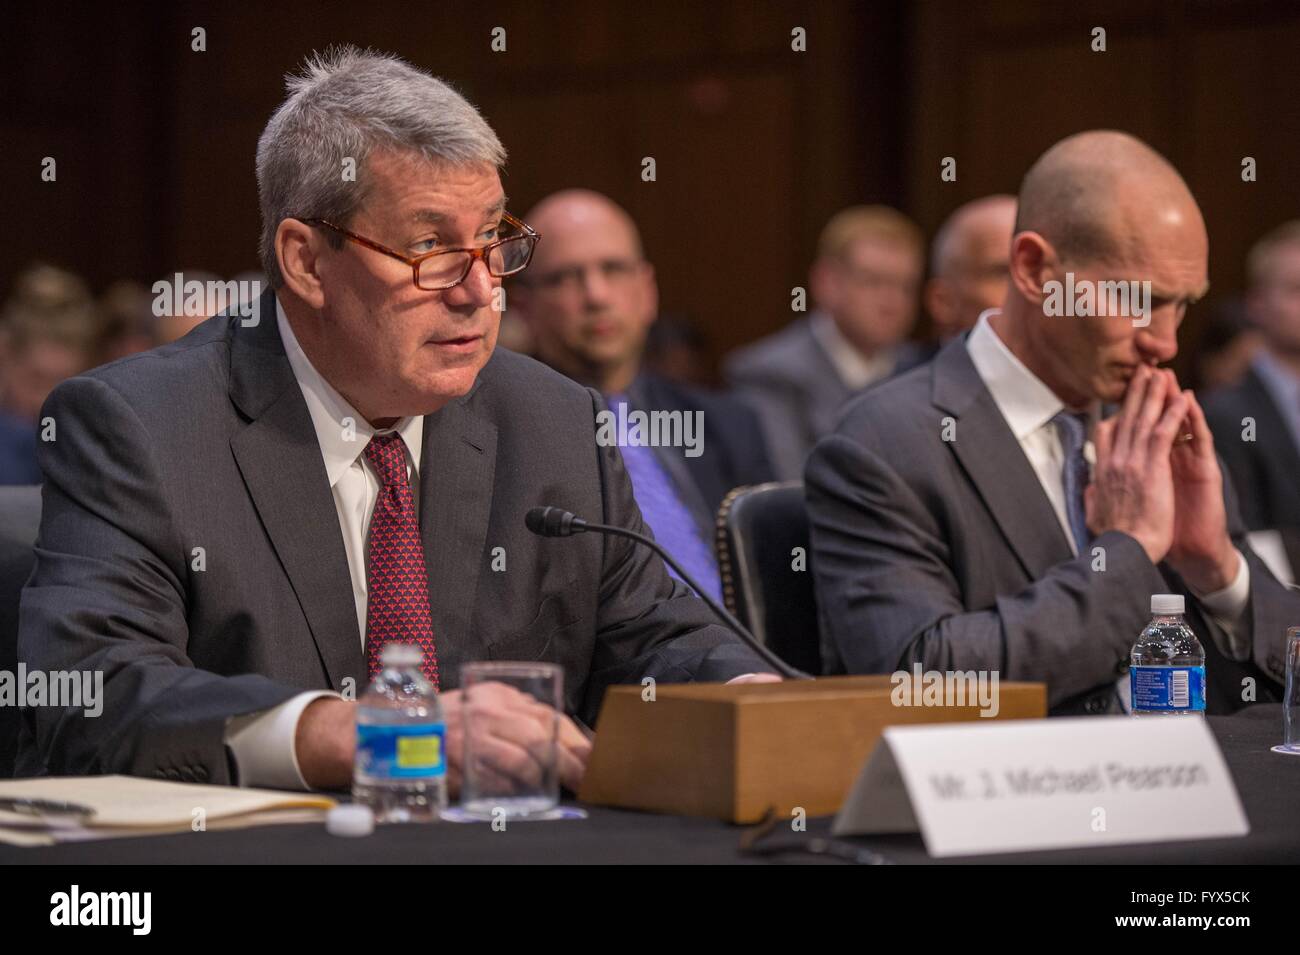 The Valeant Pharmaceuticals CEO Michael Pearson testifies before the U.S Senate Committee on Aging hearing about their business practices on Capitol Hill April 27, 2016 in Washington, DC. To the right of Pearson is Valeant Former CFO Howard Schiller. Stock Photo